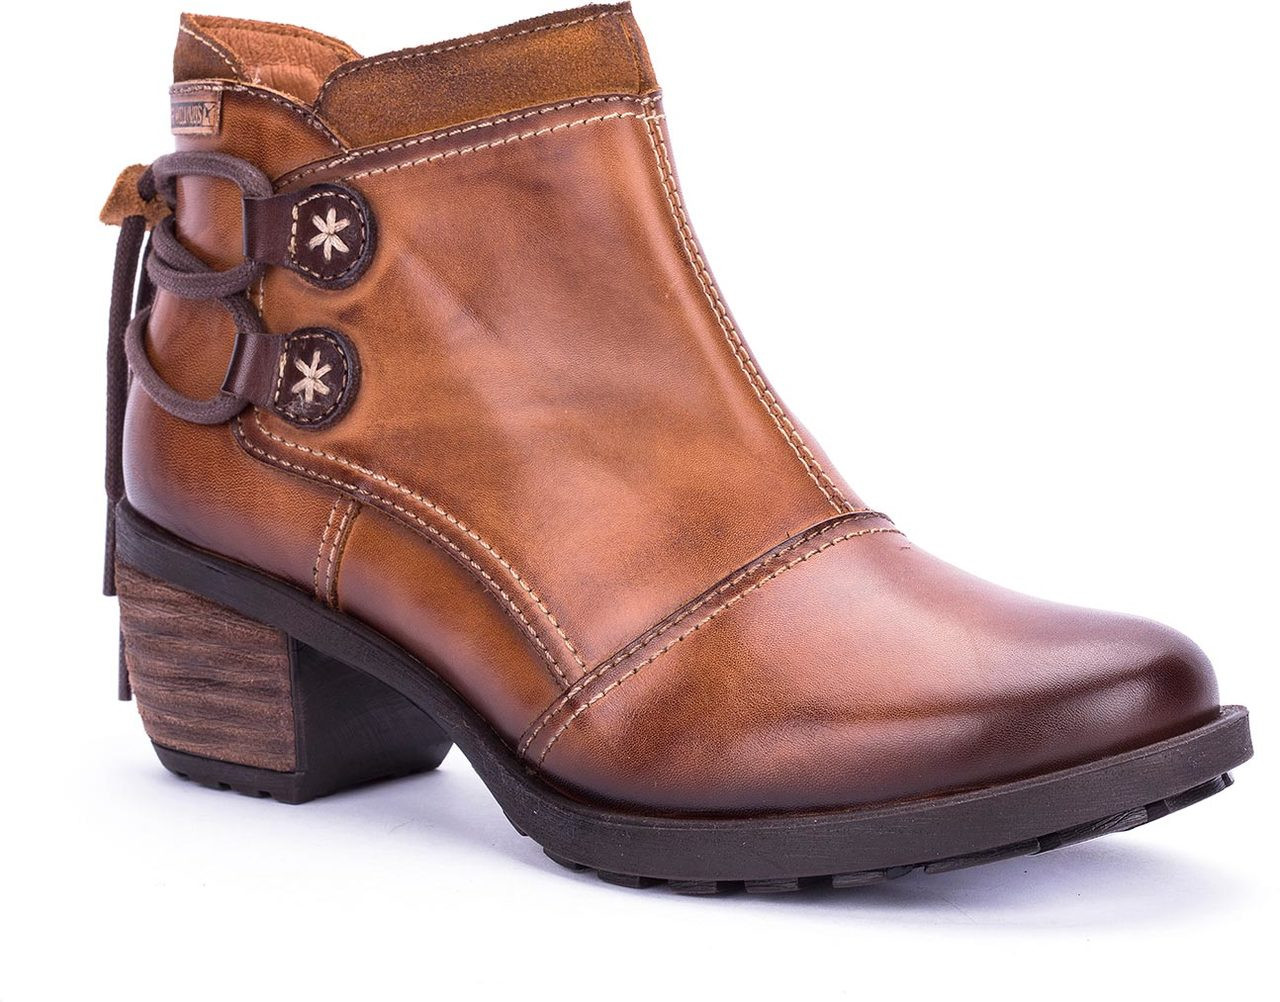 Pikolinos Le Mans 838-8696 Brandy Womens Boots 